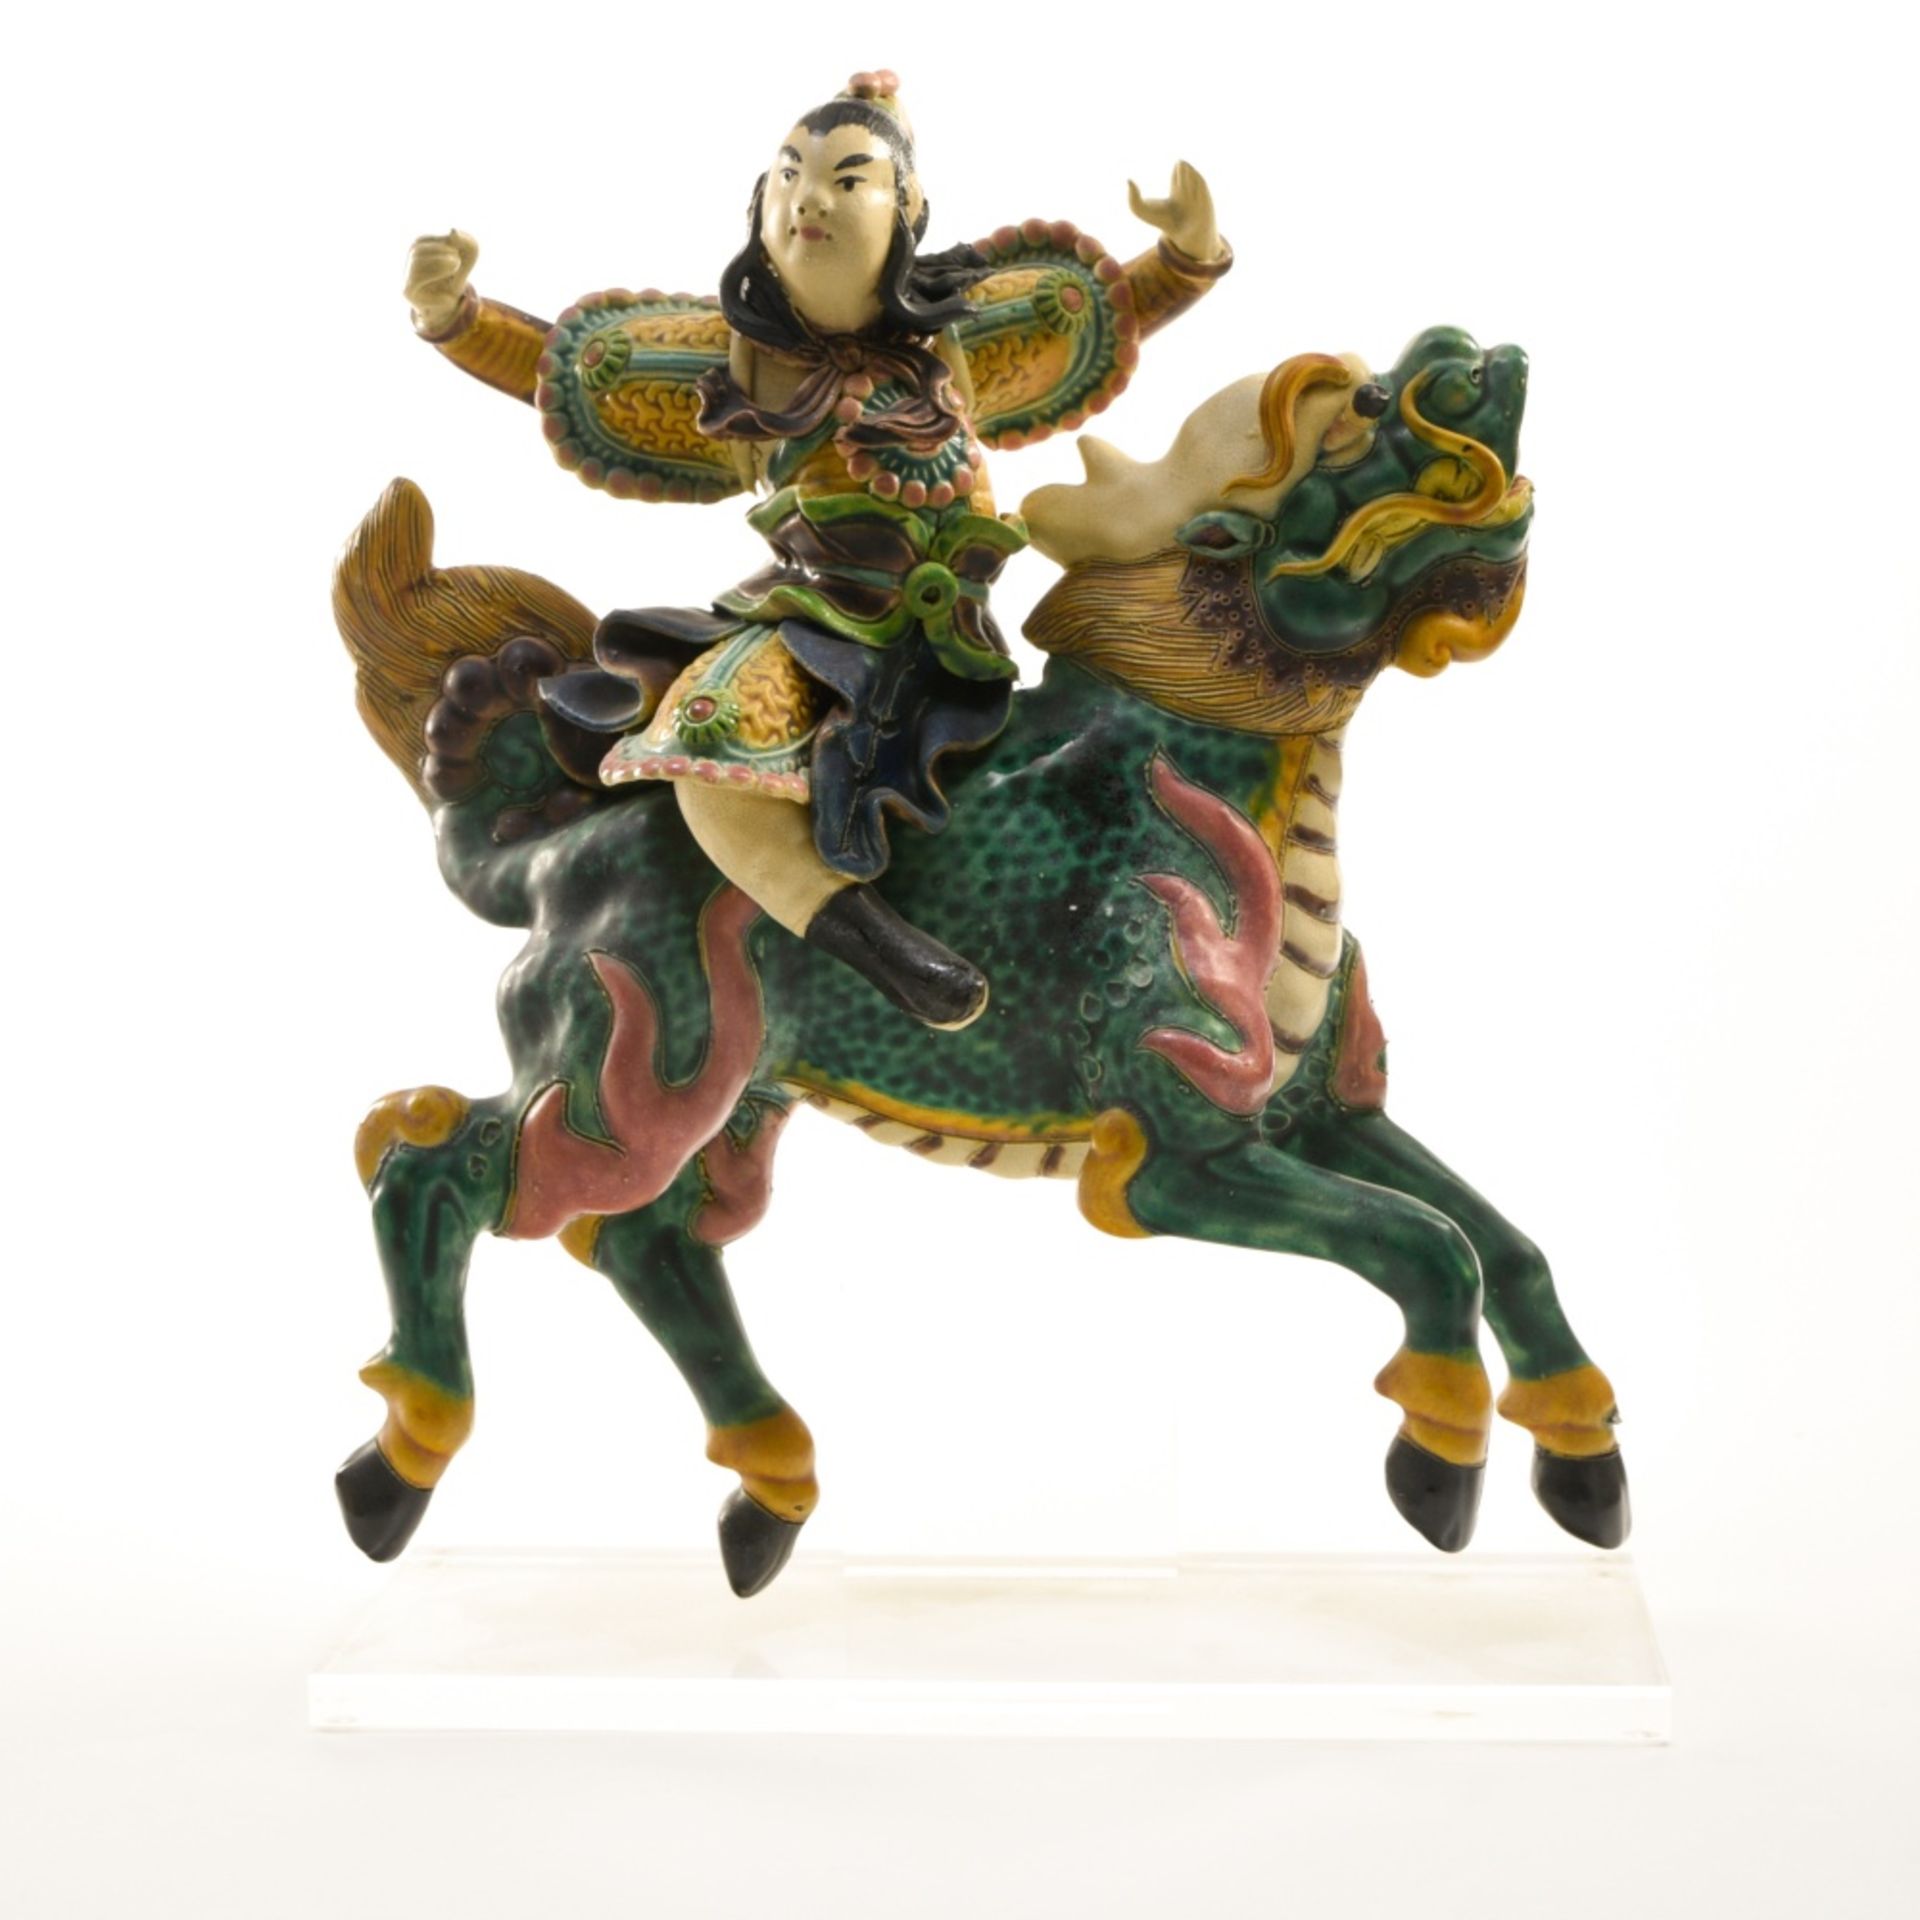 China, 20th century Immortal riding a qilin, Polychrome majolica. On a stand. Height (cm) : 23 - - Image 2 of 2